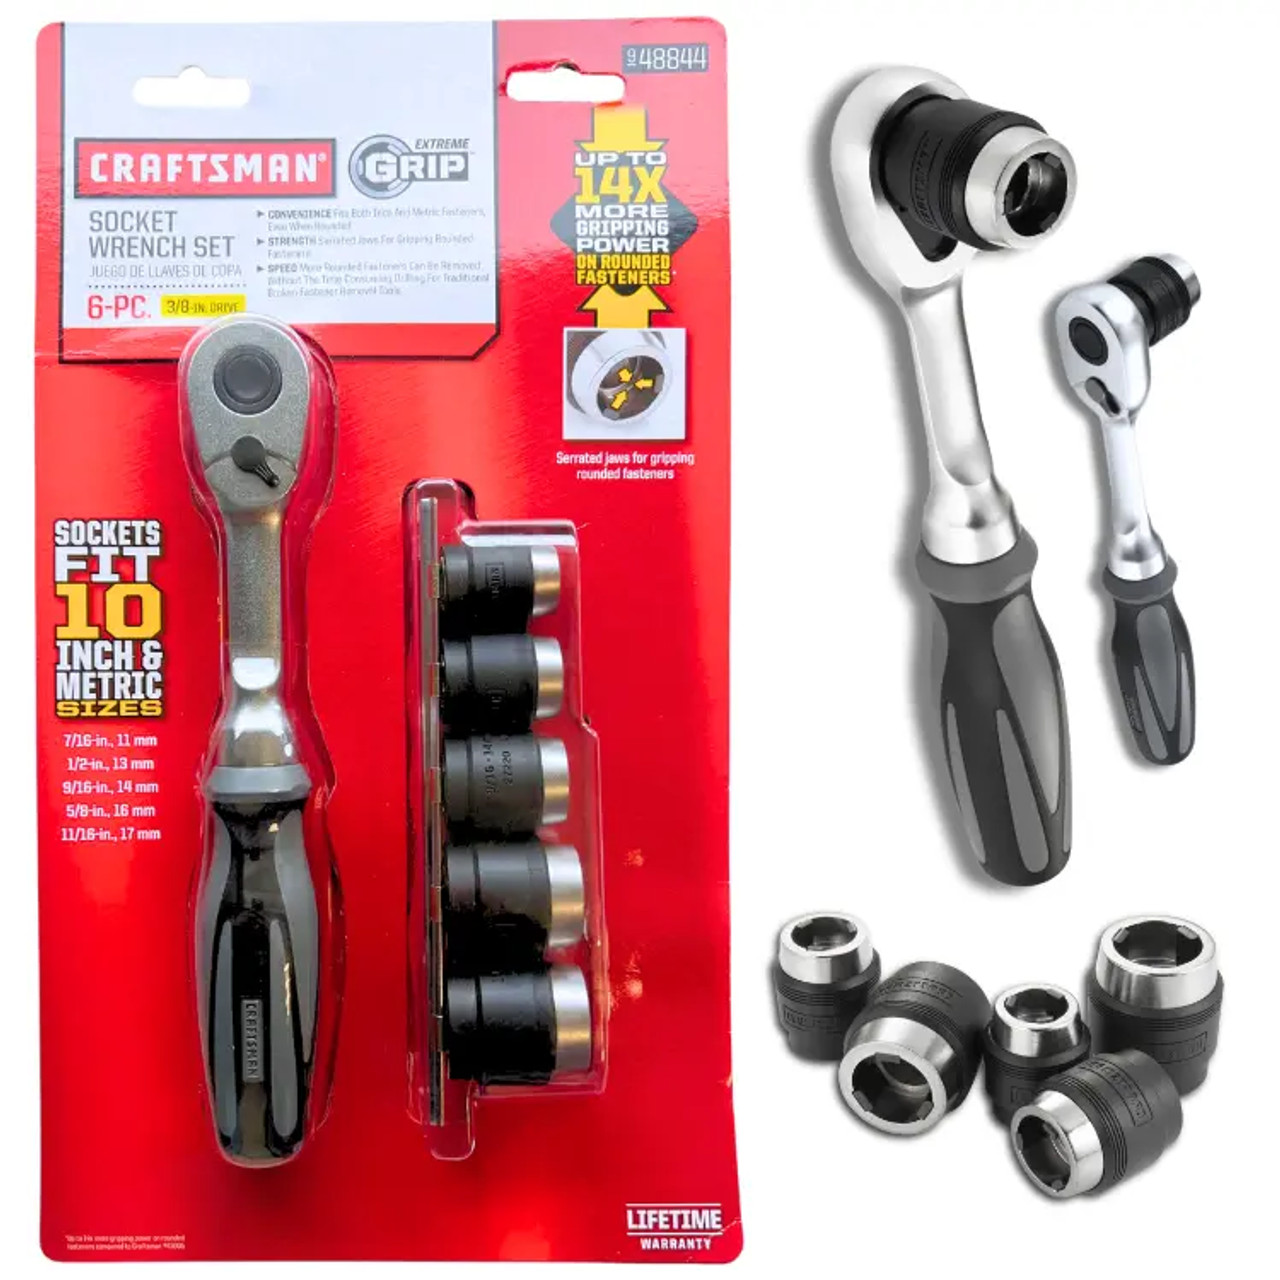 Wrenches - Strong Grip for Every Fastening